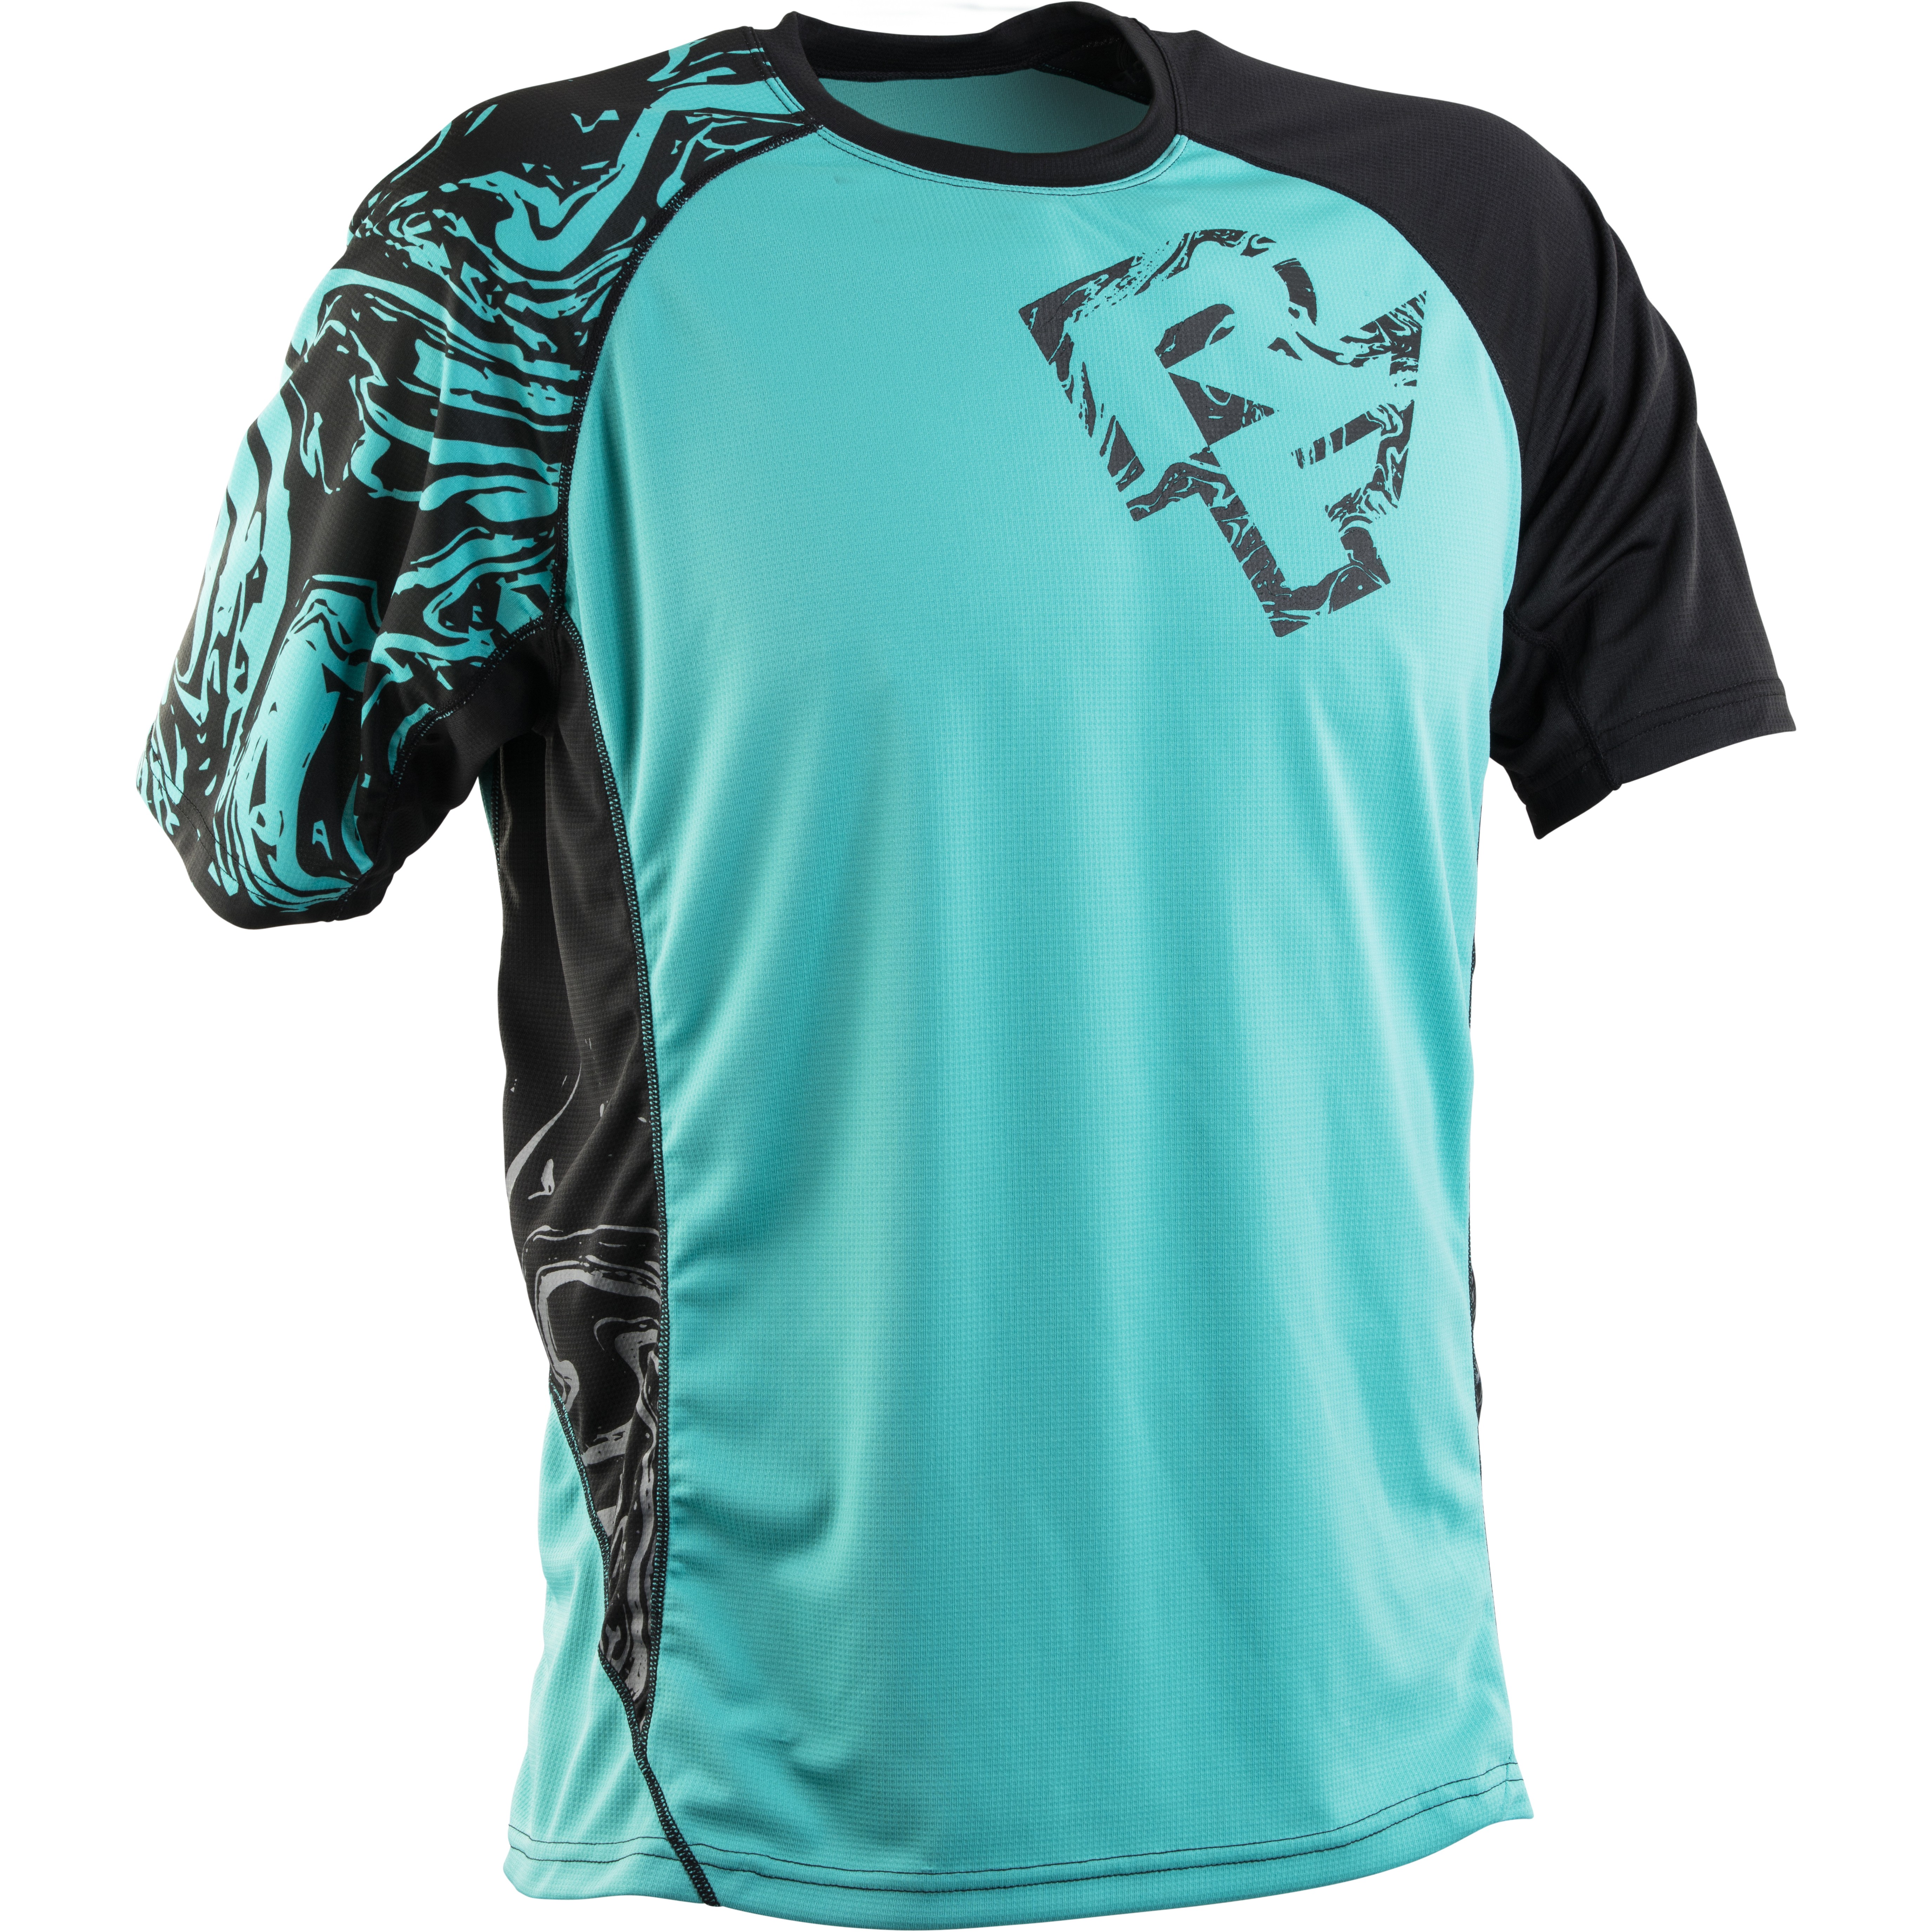 RACE FACE Indy Jersey SS Turquoise Black